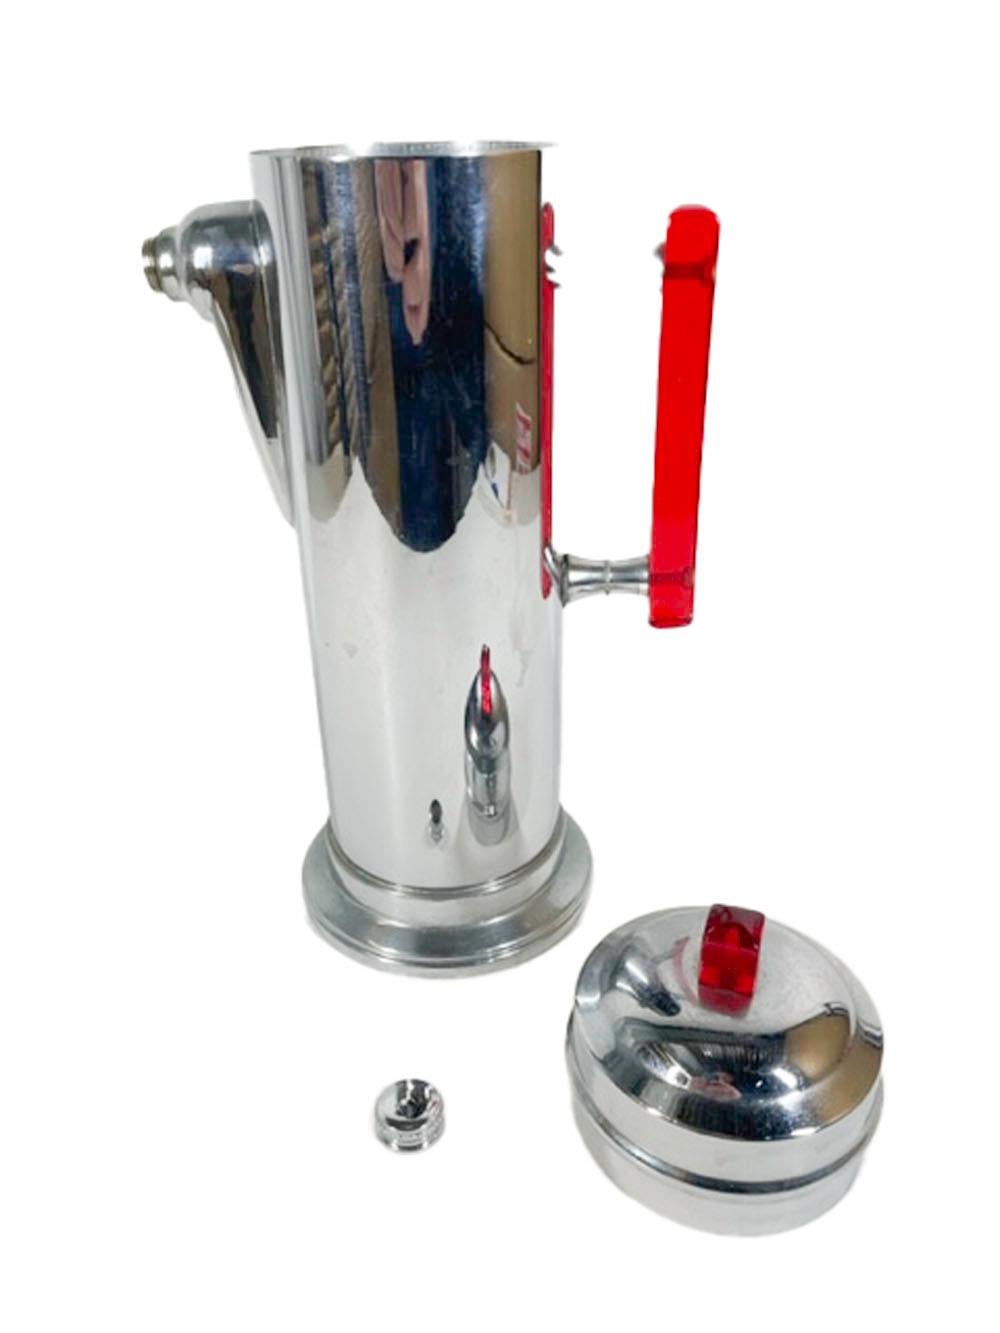 20th Century Art Deco Cylindrical Cocktail Shaker with Translucent Red Handle and Knob For Sale